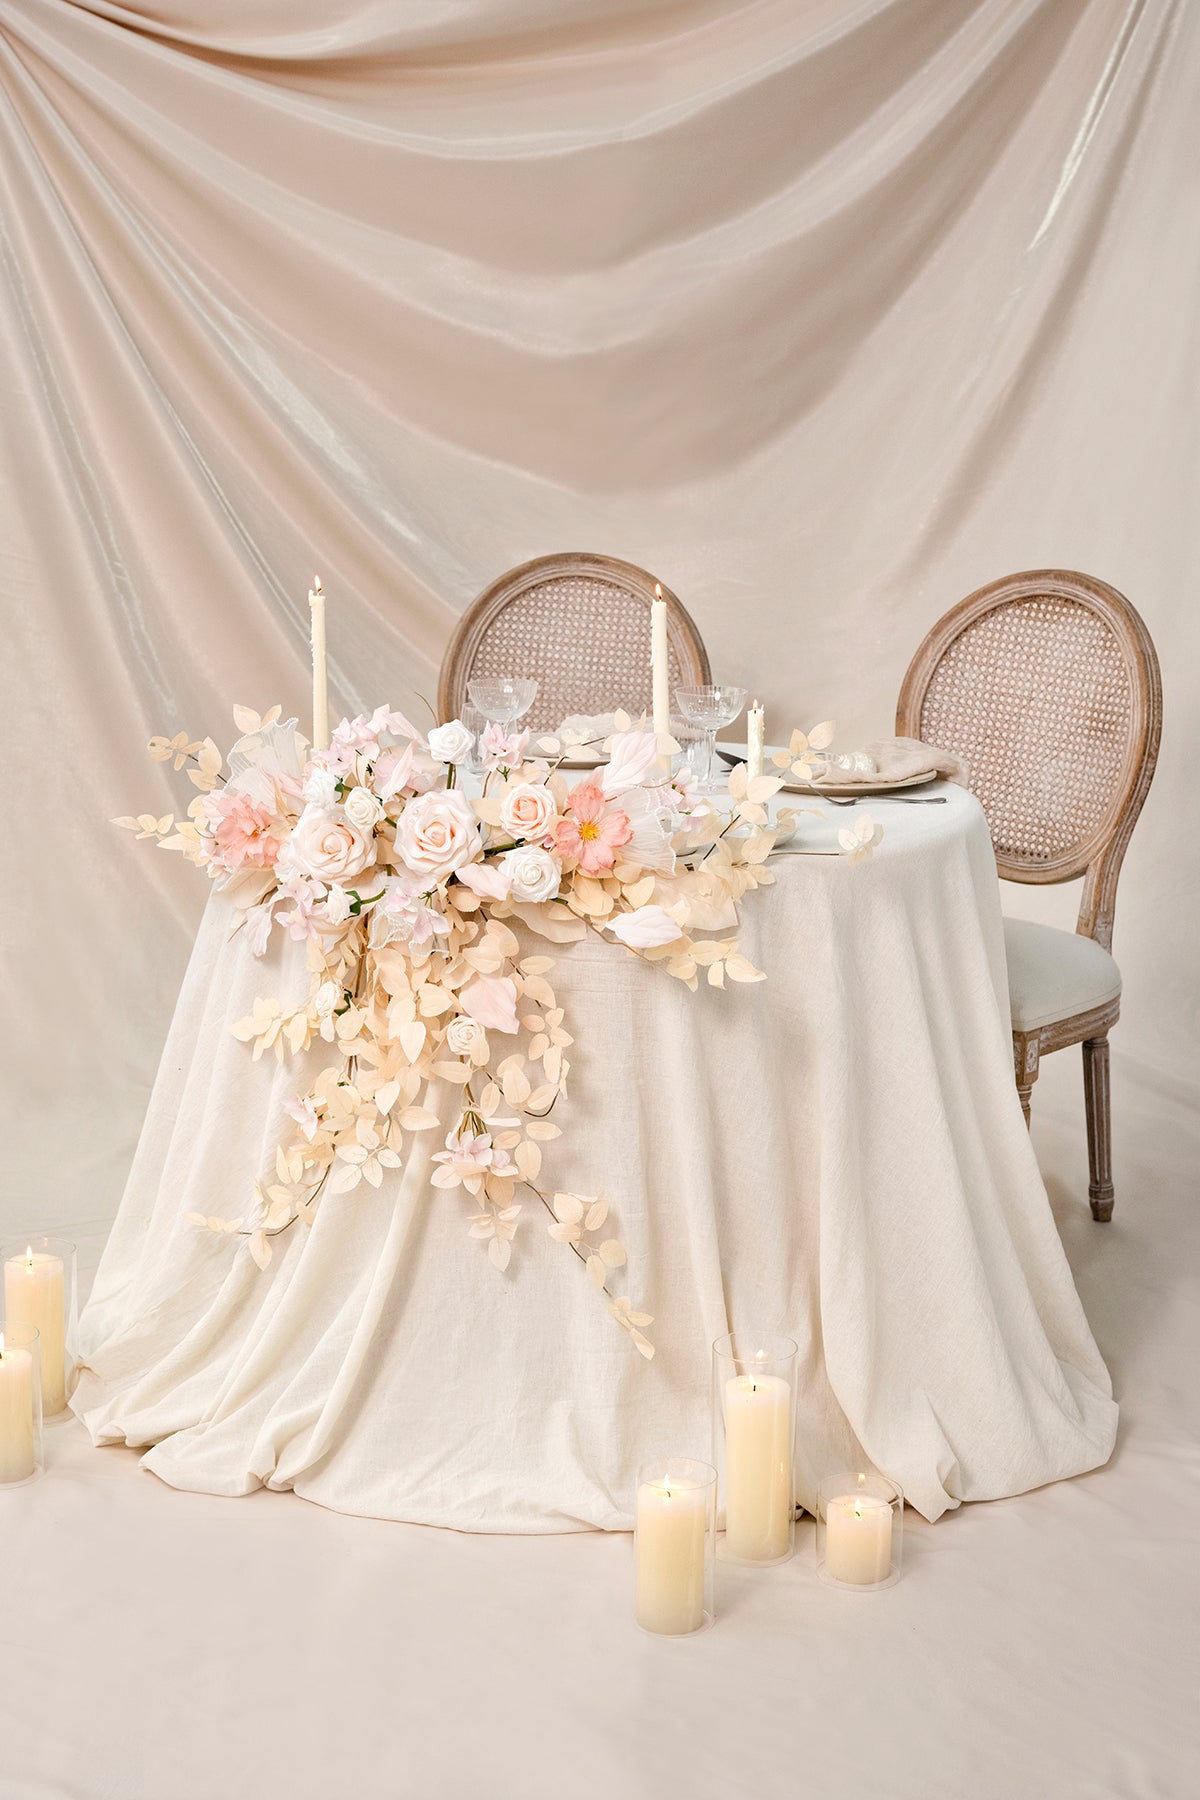 Sweetheart Table Floral Swags in Glowing Blush & Pearl